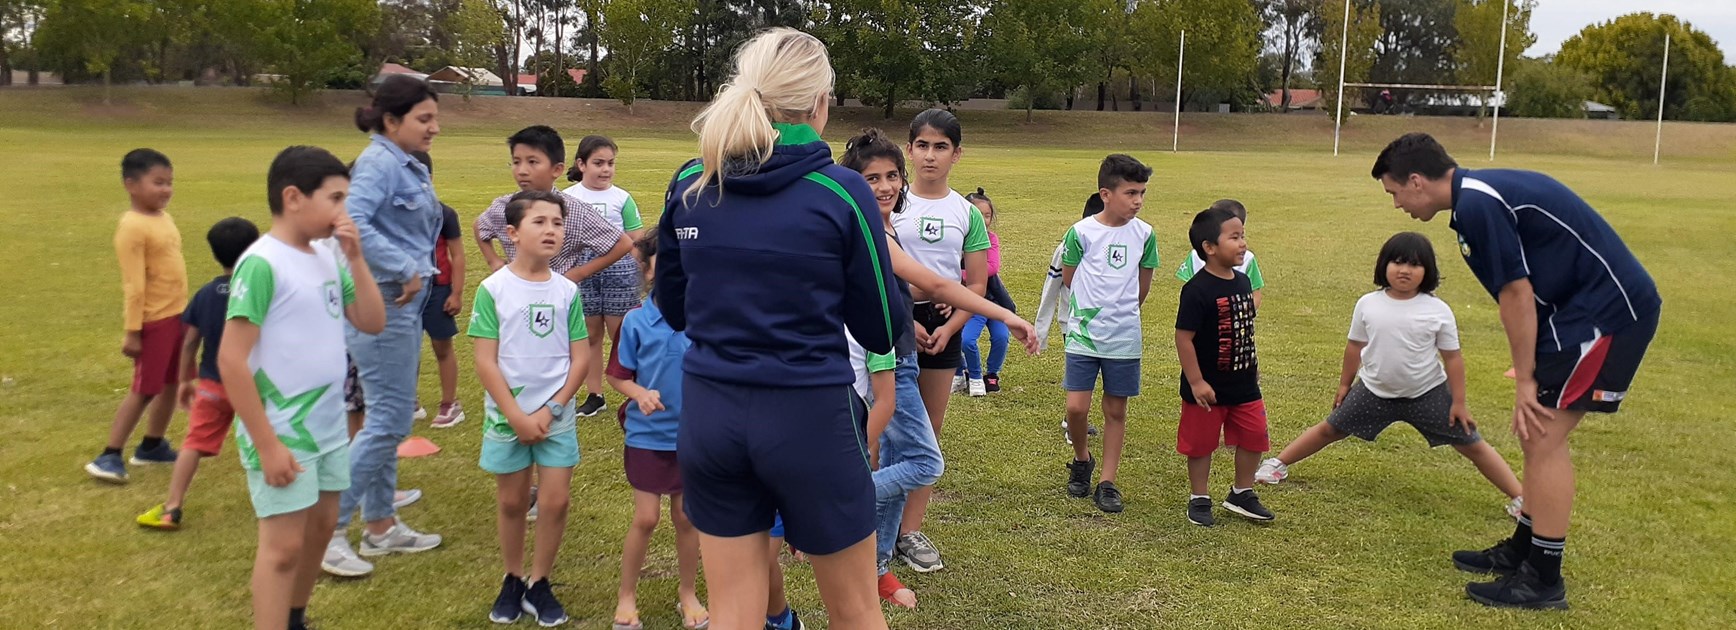 Harmony heroes: Refugees introduced to footy with League Stars, Red Cross